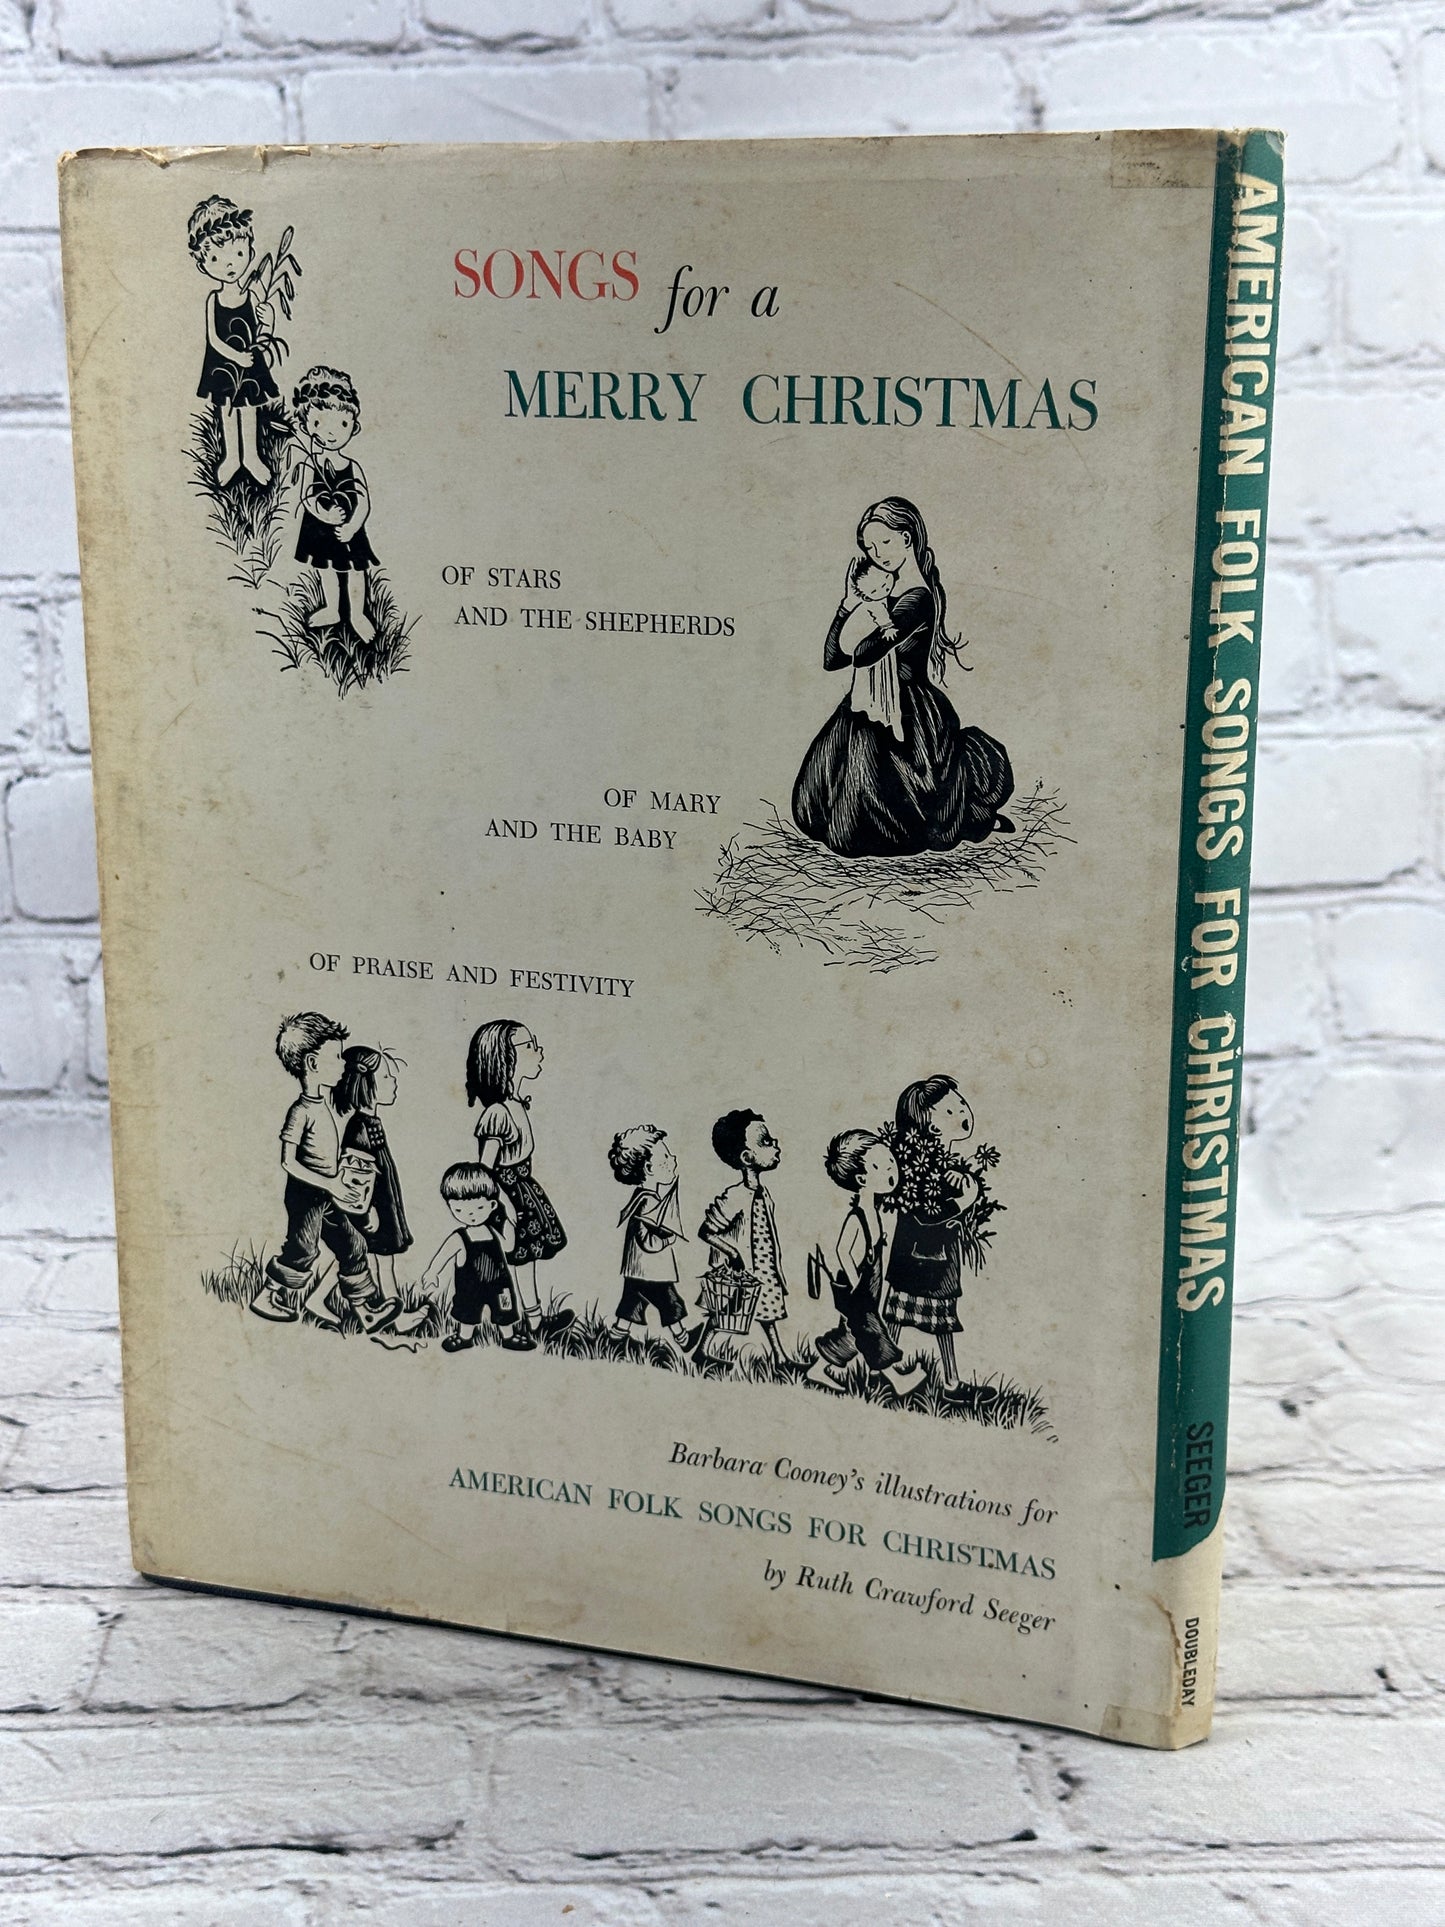 American Folk Songs For Christmas byRuth Seeger Hardcover [1st Edition · 1953]